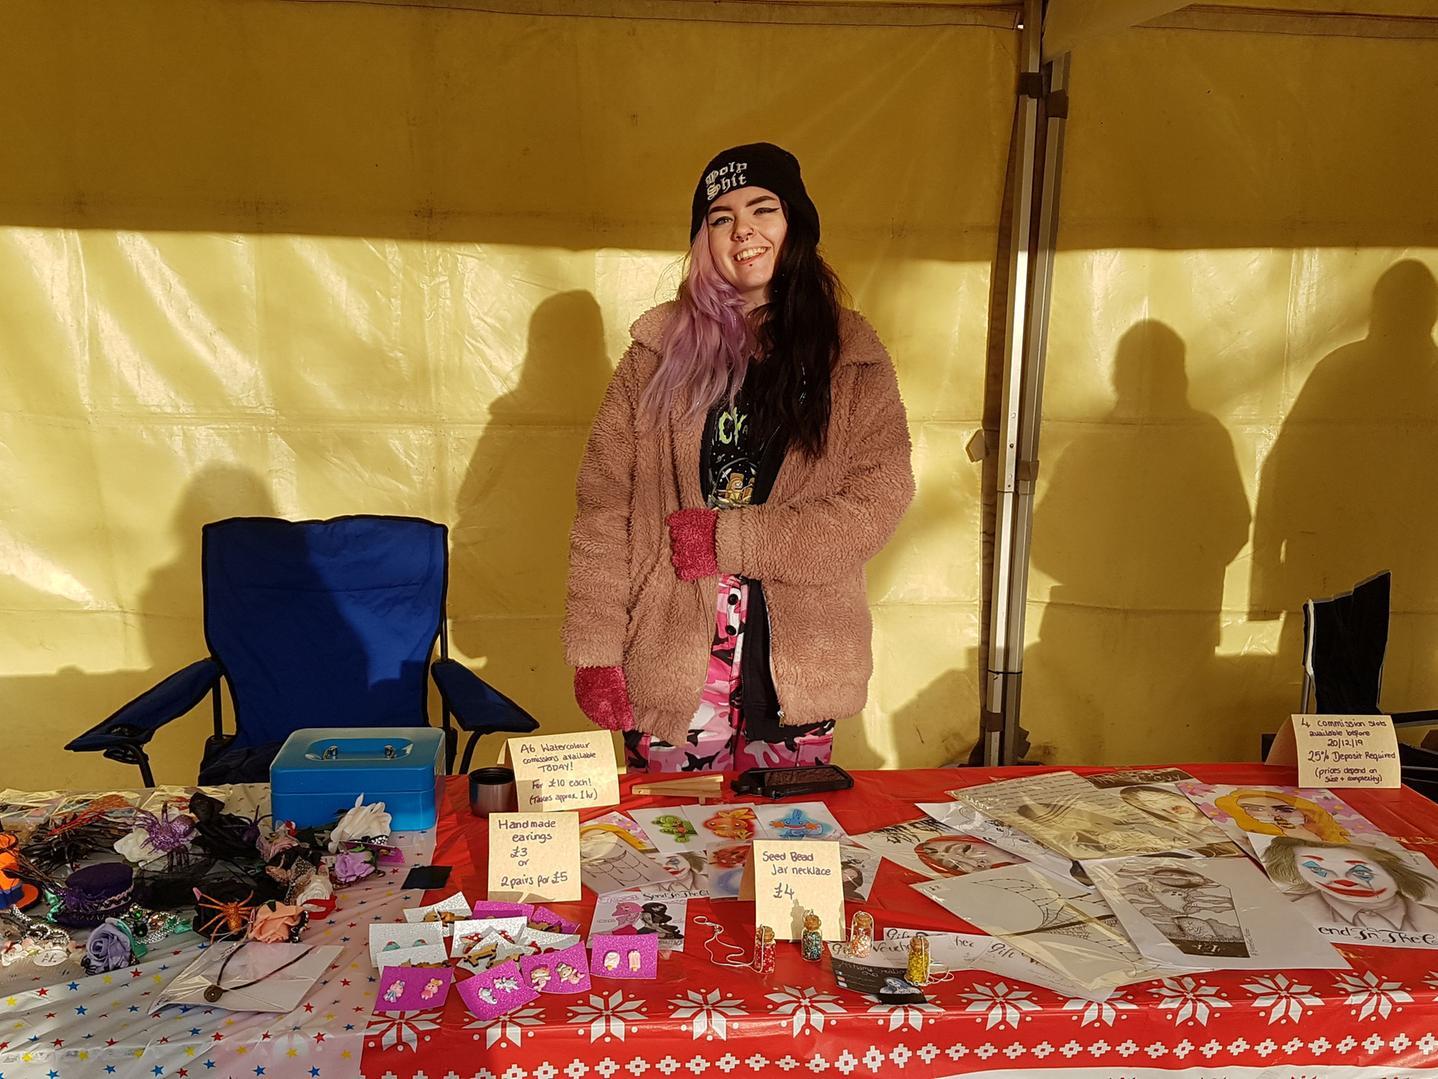 Bronte Ford, 19, was selling art and crafts. She is studying illustration at Northampton College and has taken part in the last two Teenage Markets in Kettering.